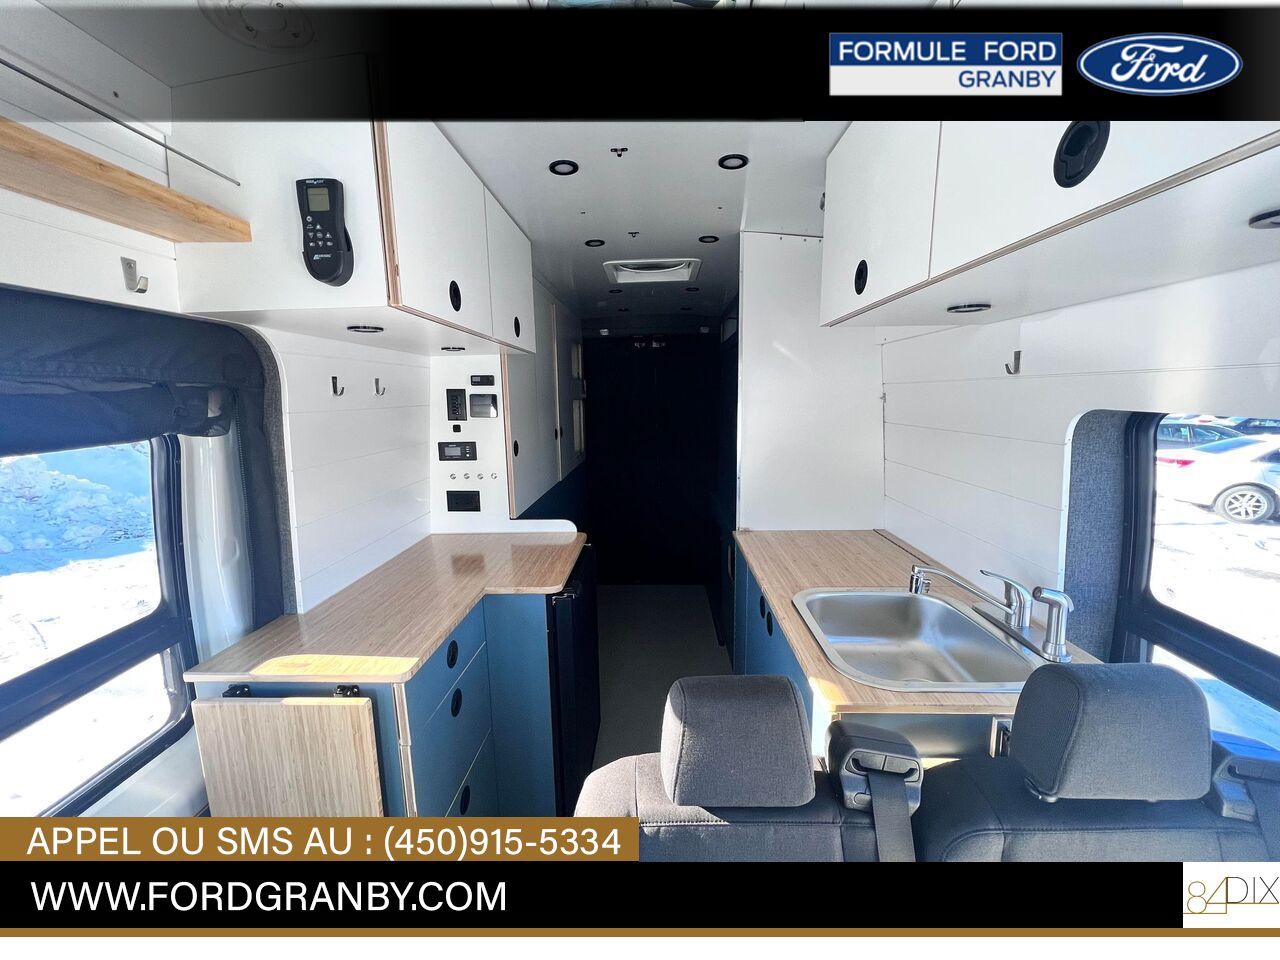 2019 Ford Transit fourgon utilitaire Granby - photo #21